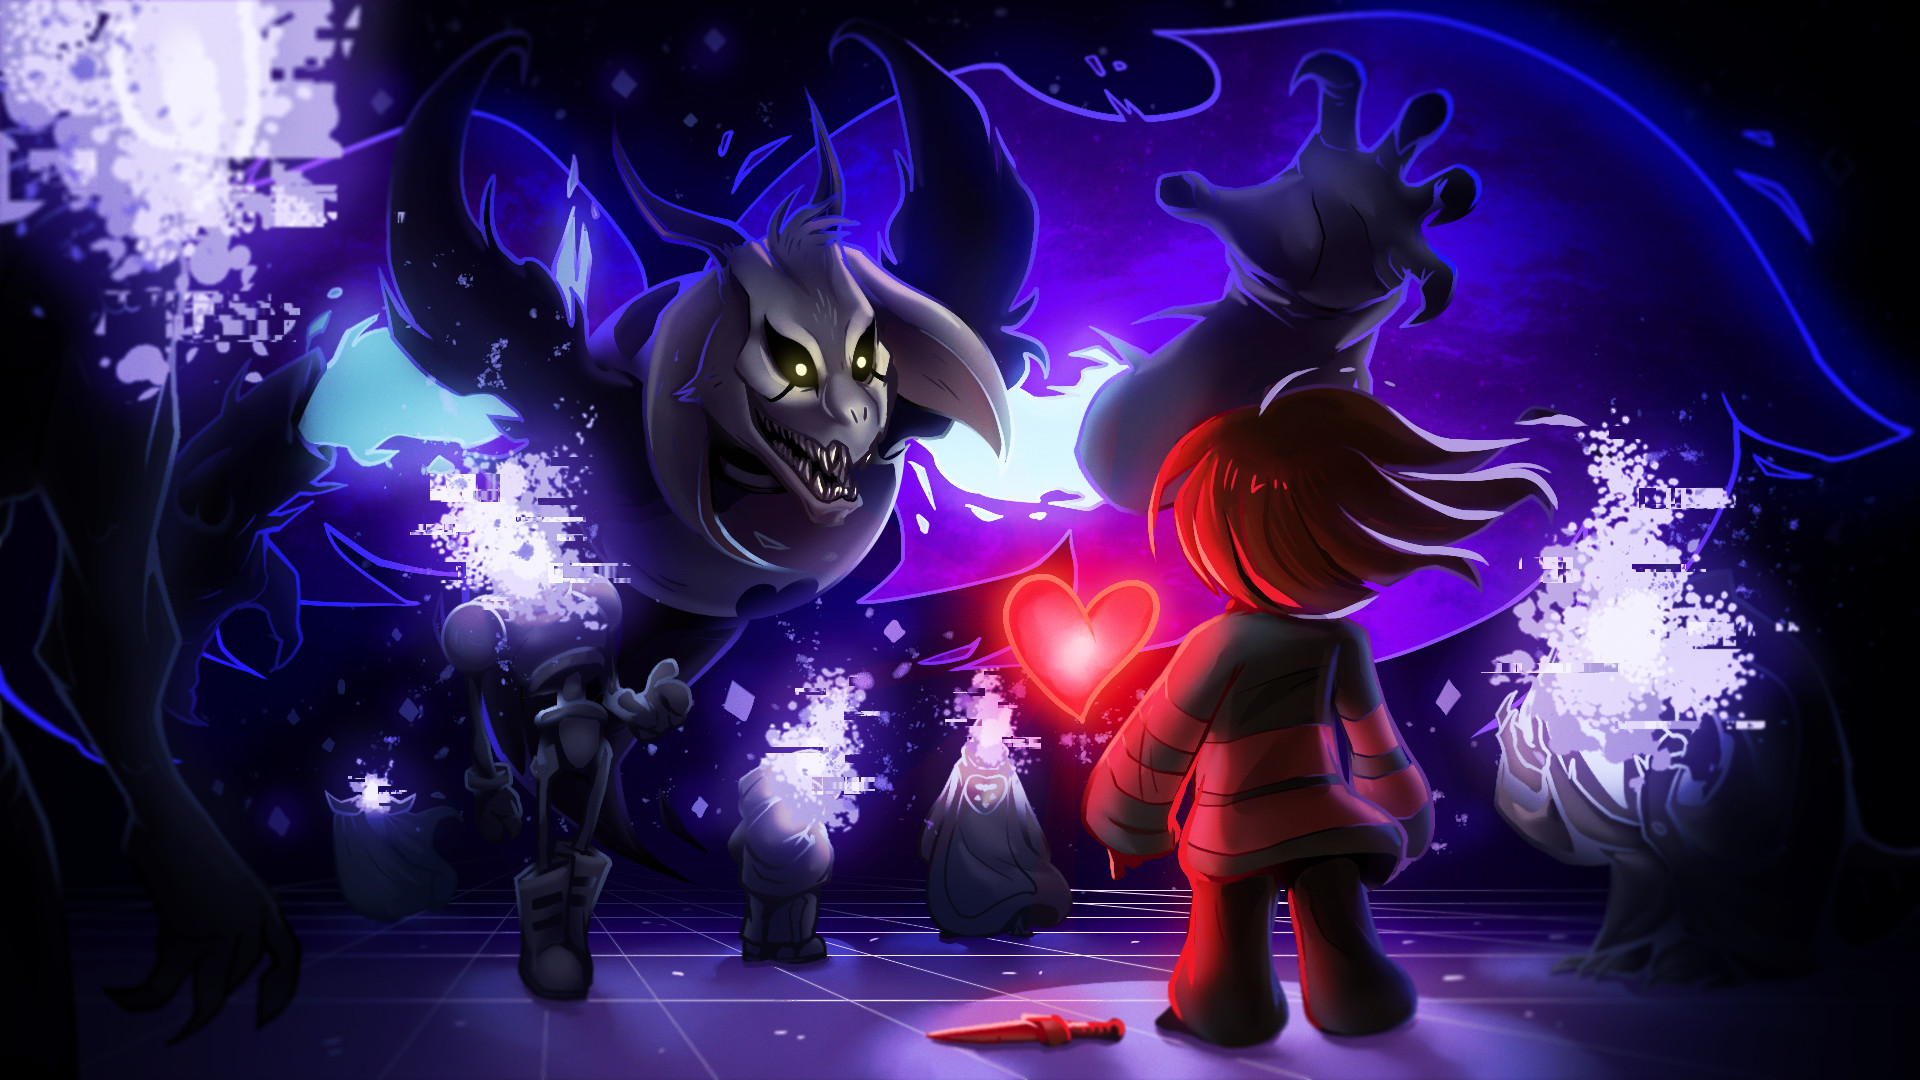 1920x1080 Undertale Wallpapers (boss battles of genocide, neutral, and pacifist  endings)